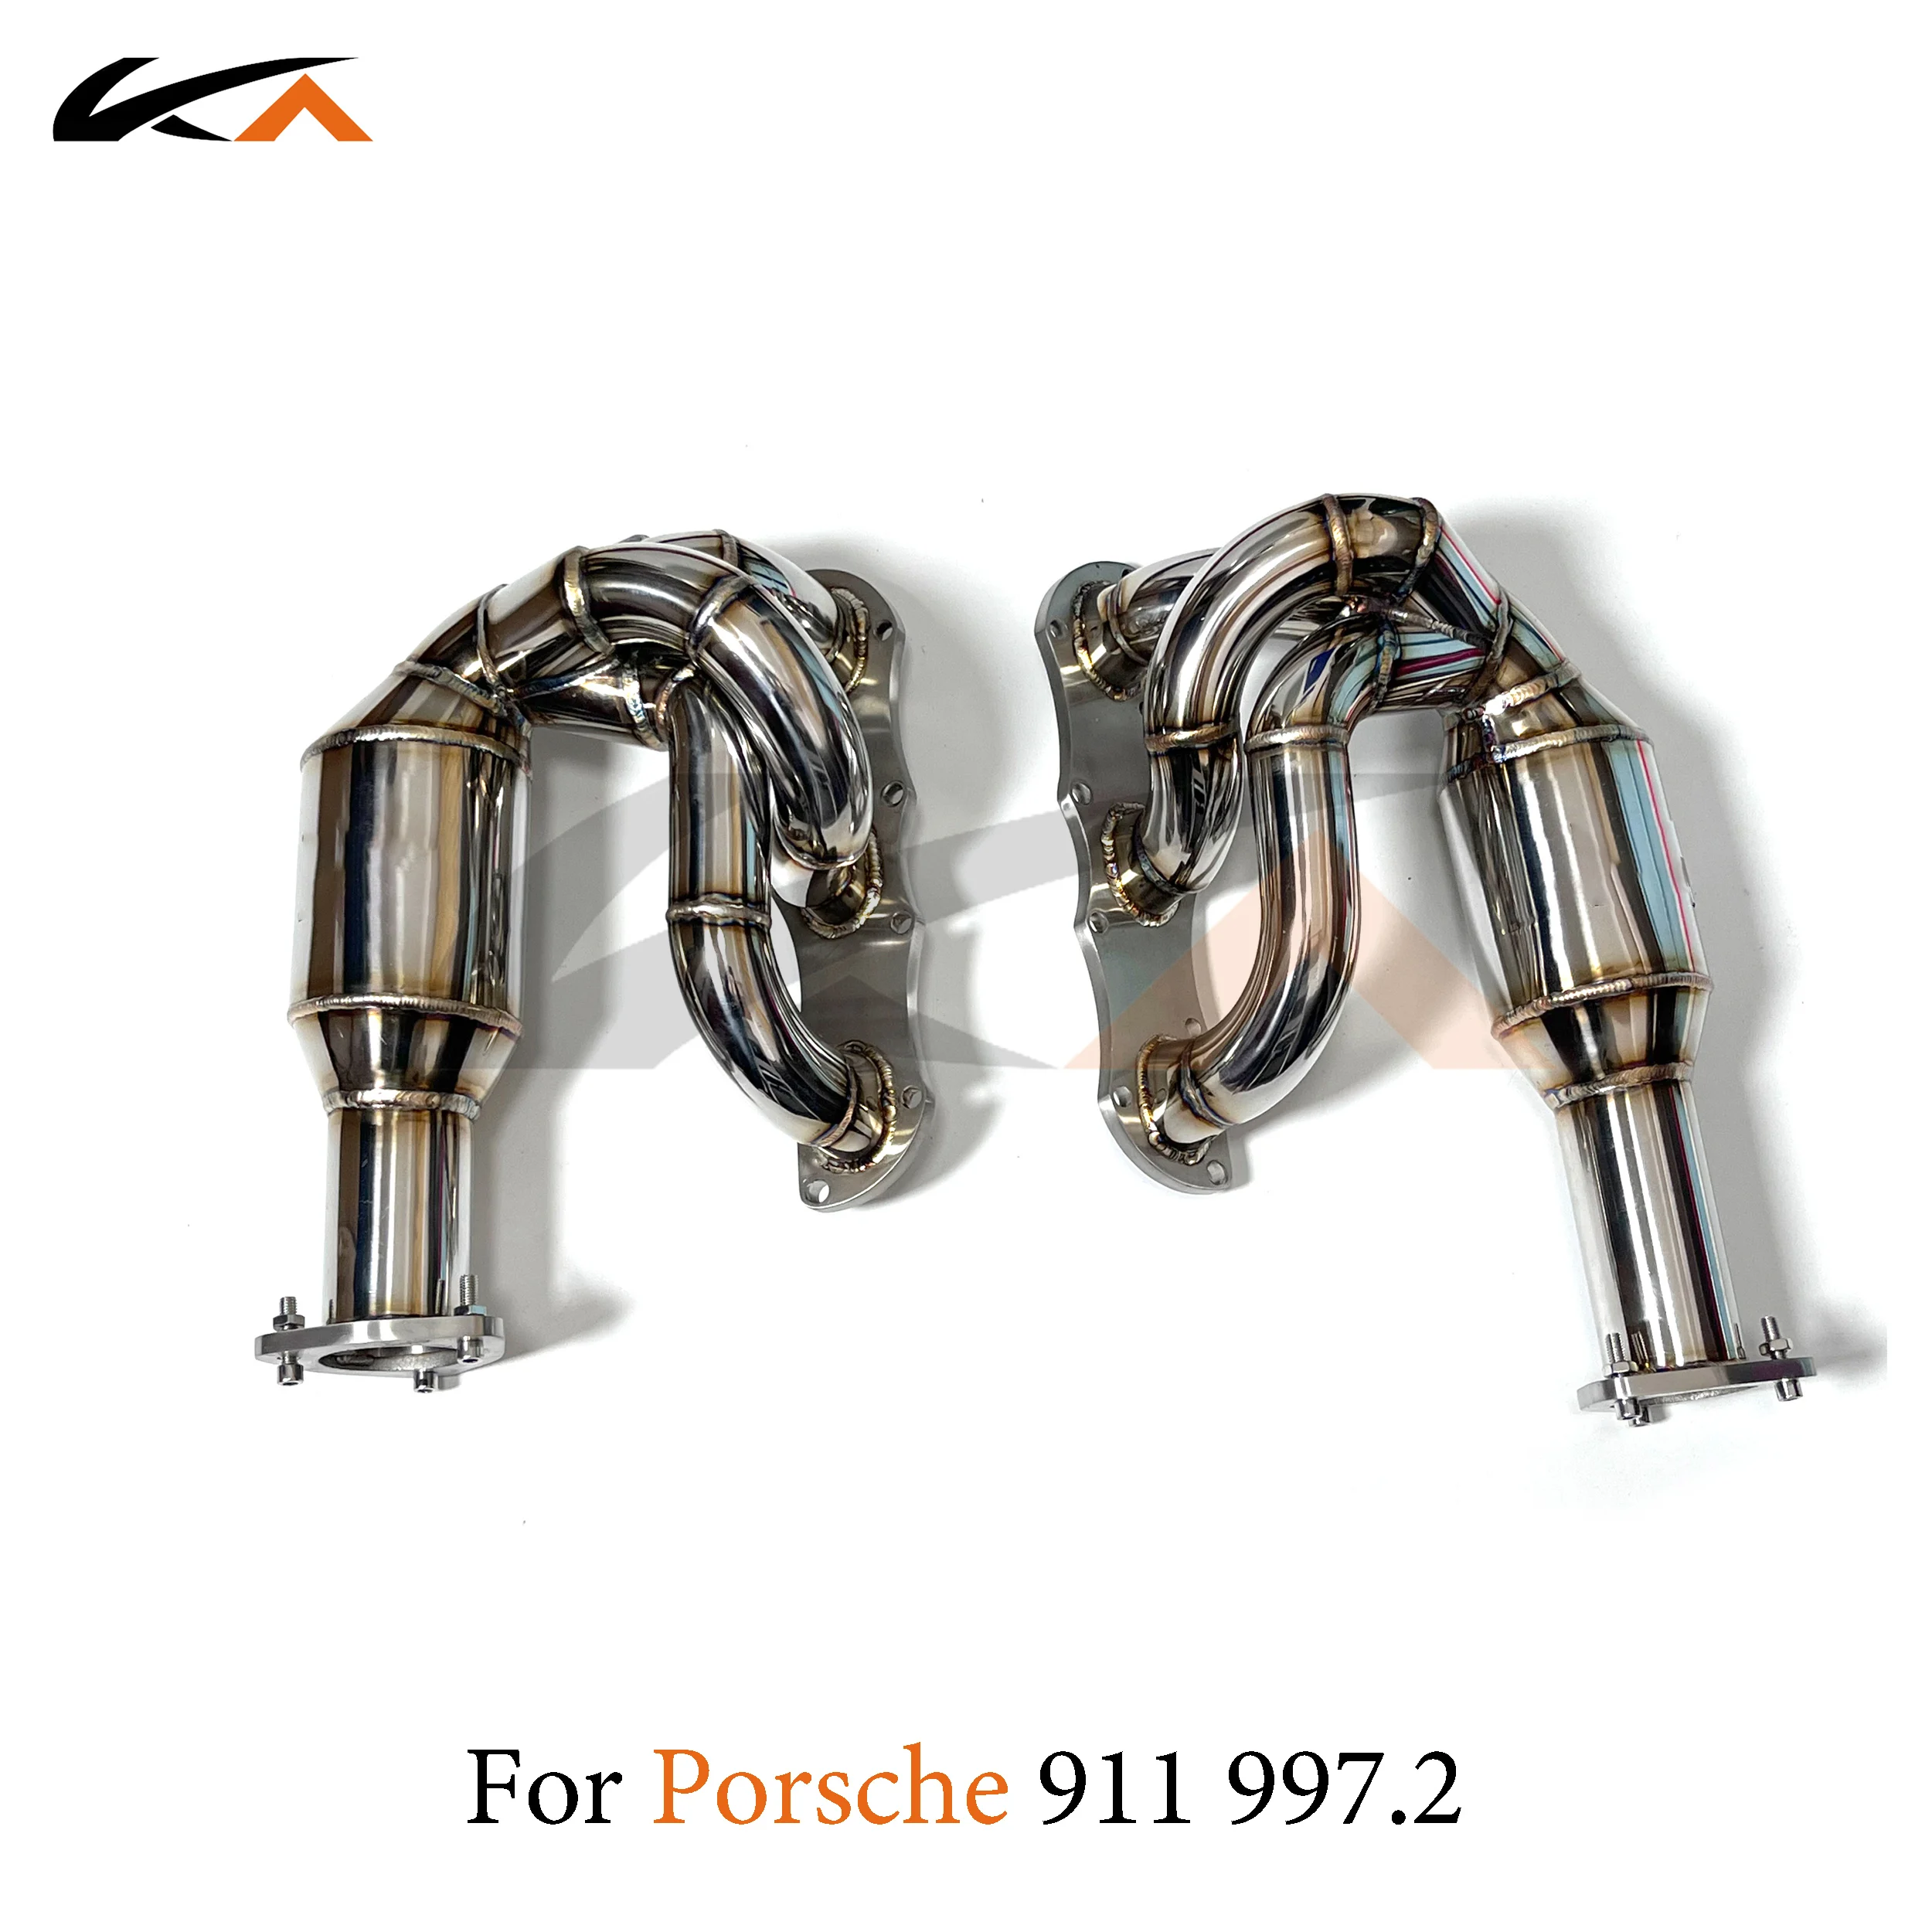 

KA Tuning manifold exhaust system stainless steel headers for Porsche 911 997.2 3.8 performance auto parts catalysis